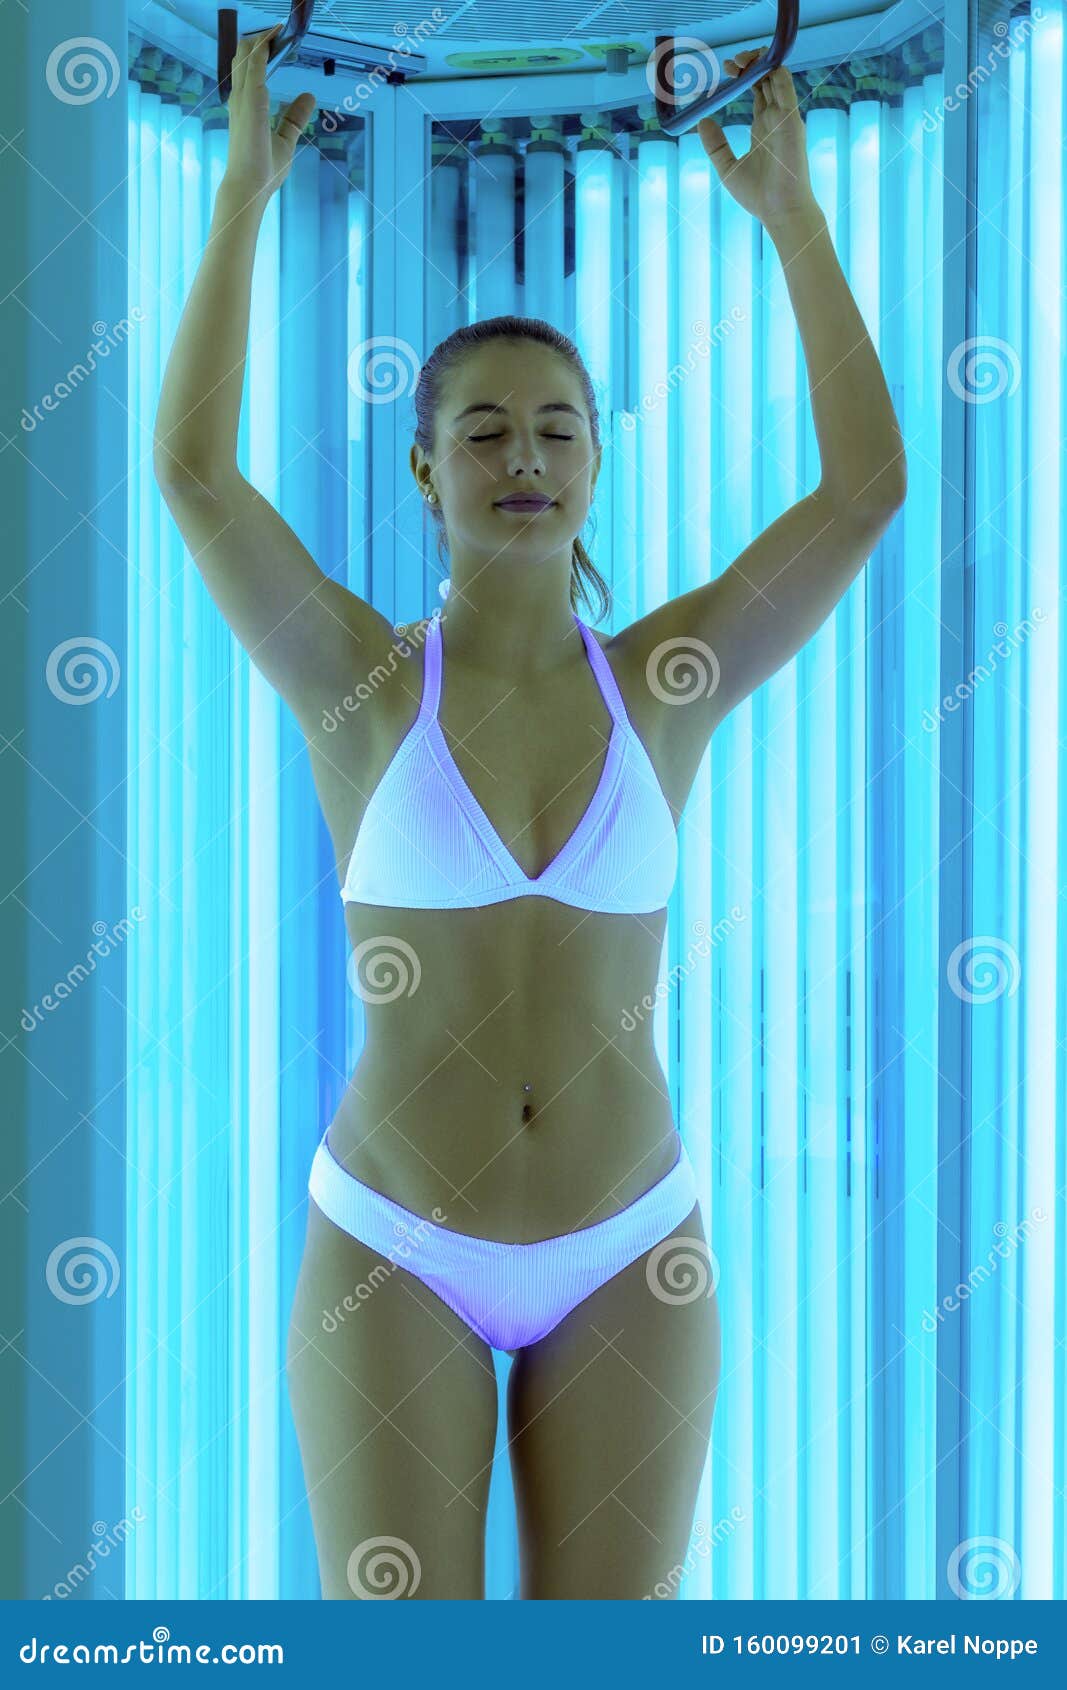 Naked girls sunbed 148 Standing Tanning Bed Photos Free Royalty Free Stock Photos From Dreamstime